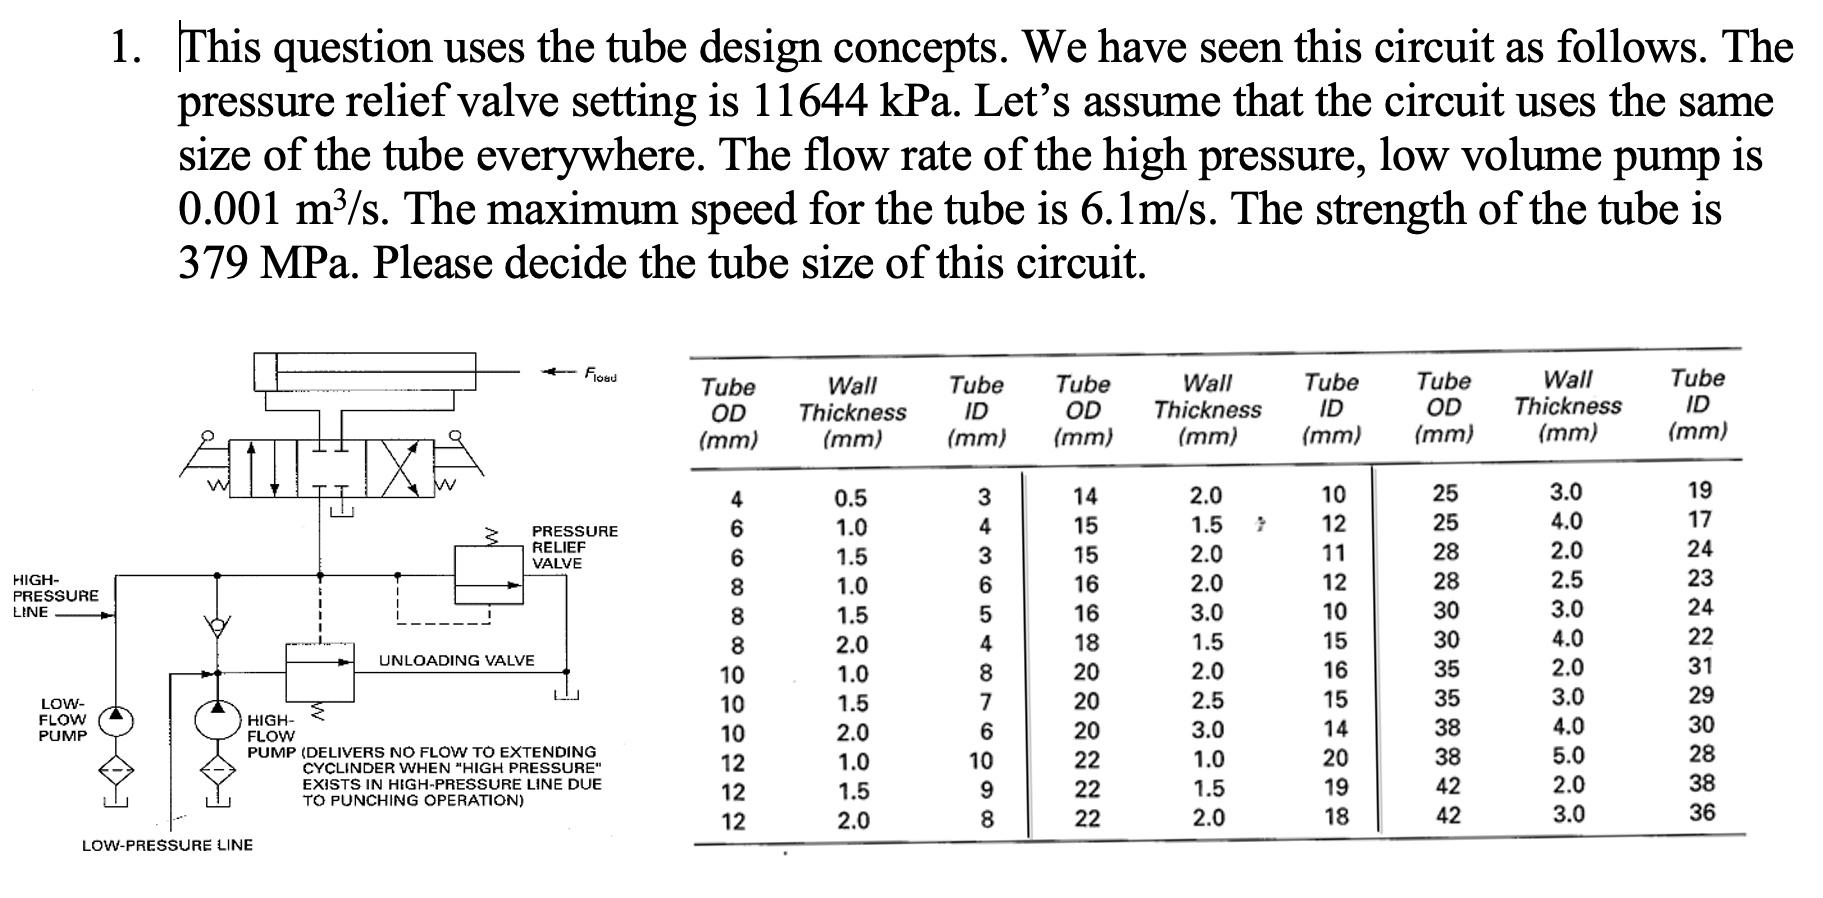 HIGH- PRESSURE LINE LOW- FLOW PUMP 1. This question uses the tube design concepts. We have seen this circuit